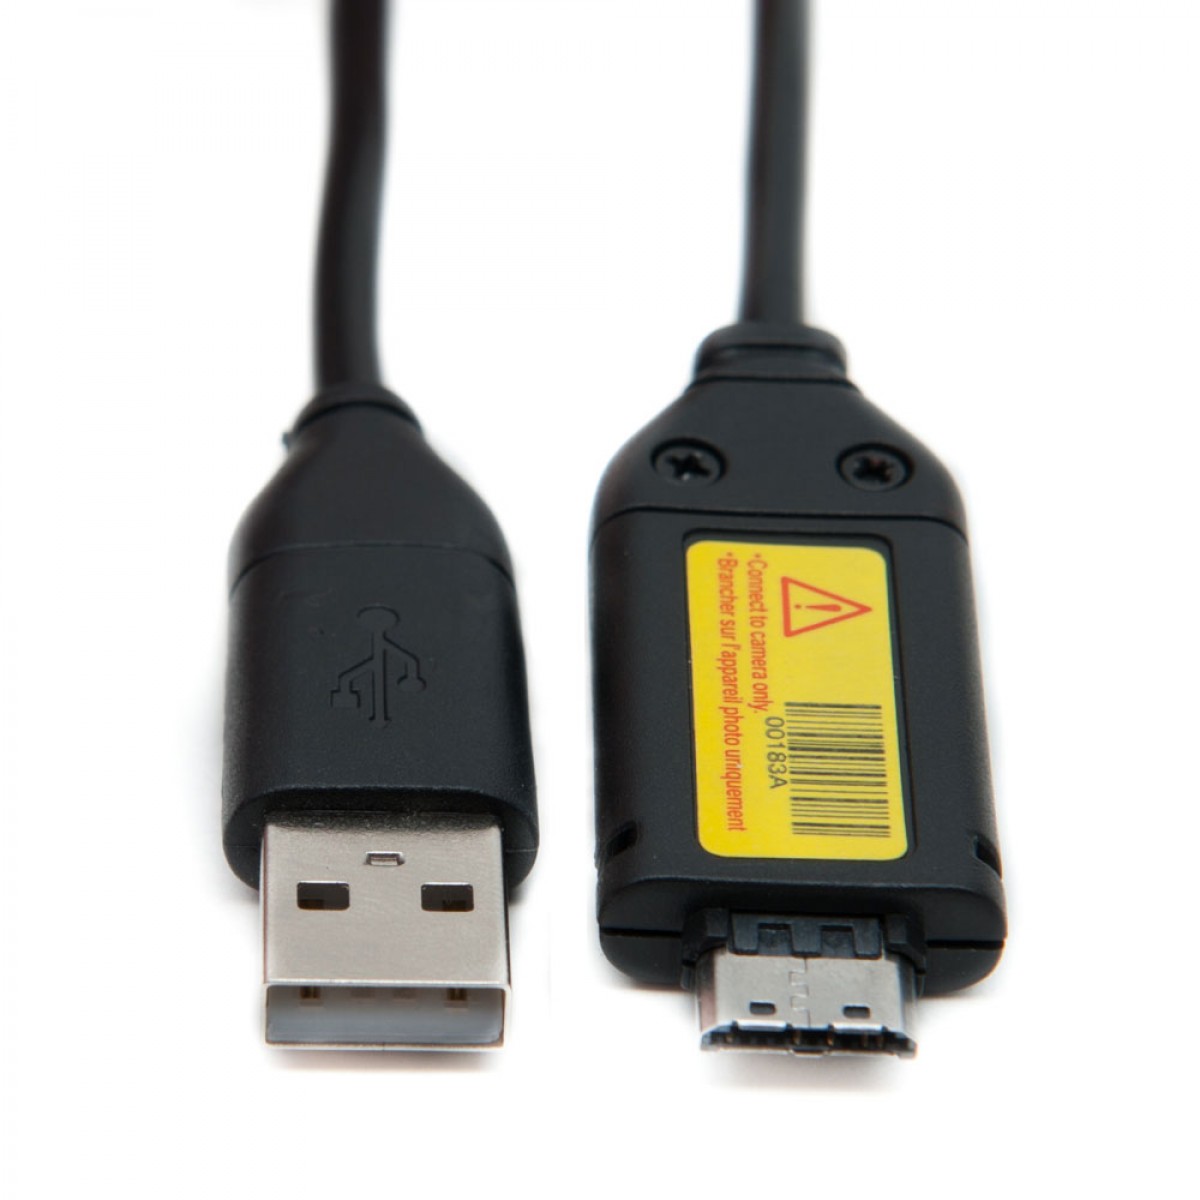 SUC-C3/C5/C7 Model Compatible 5 feet Black Samsung DualView ST600 Digital Camera Compatible USB 2.0 Data Transfer Power Charger Cable Cord Bargains Depot